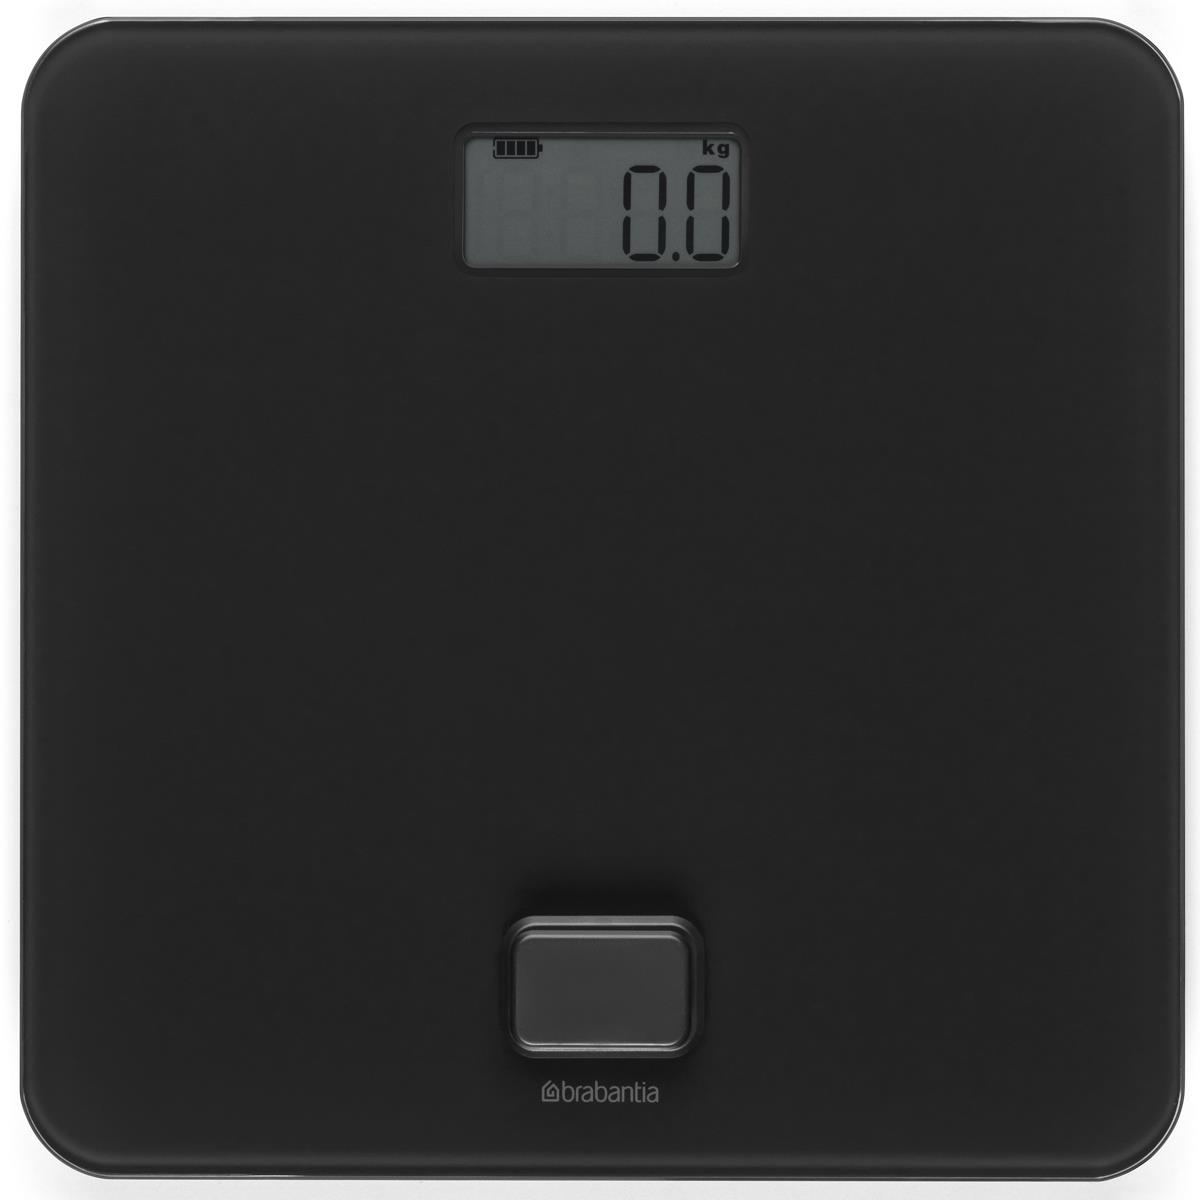 Does the Brabantia bathroom scales weigh in stones, pounds and kilos?